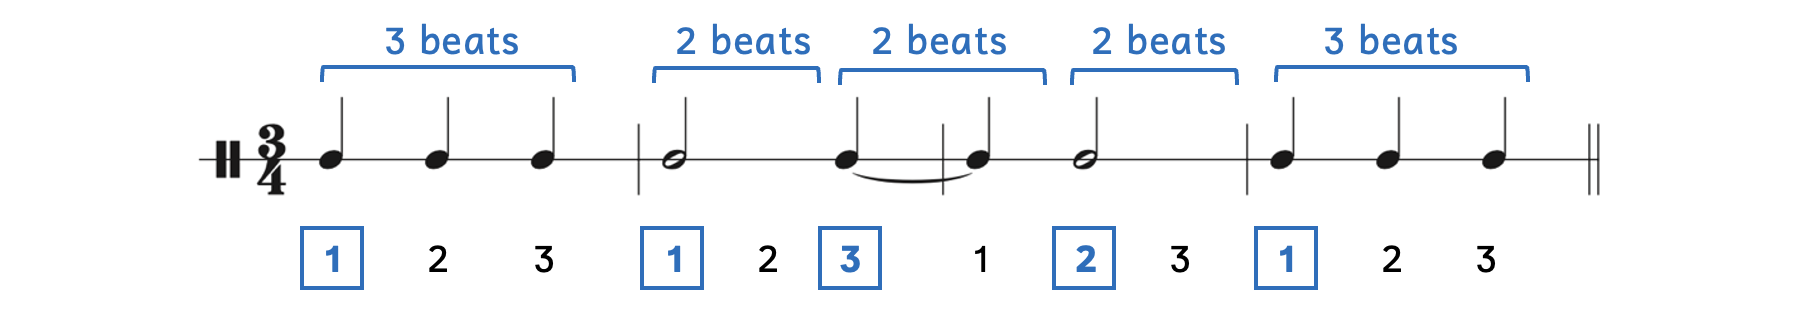 The accents in 3-4 show one on the opening down beat, then every other beat three times, and then a return to the downbeat of 3-4.